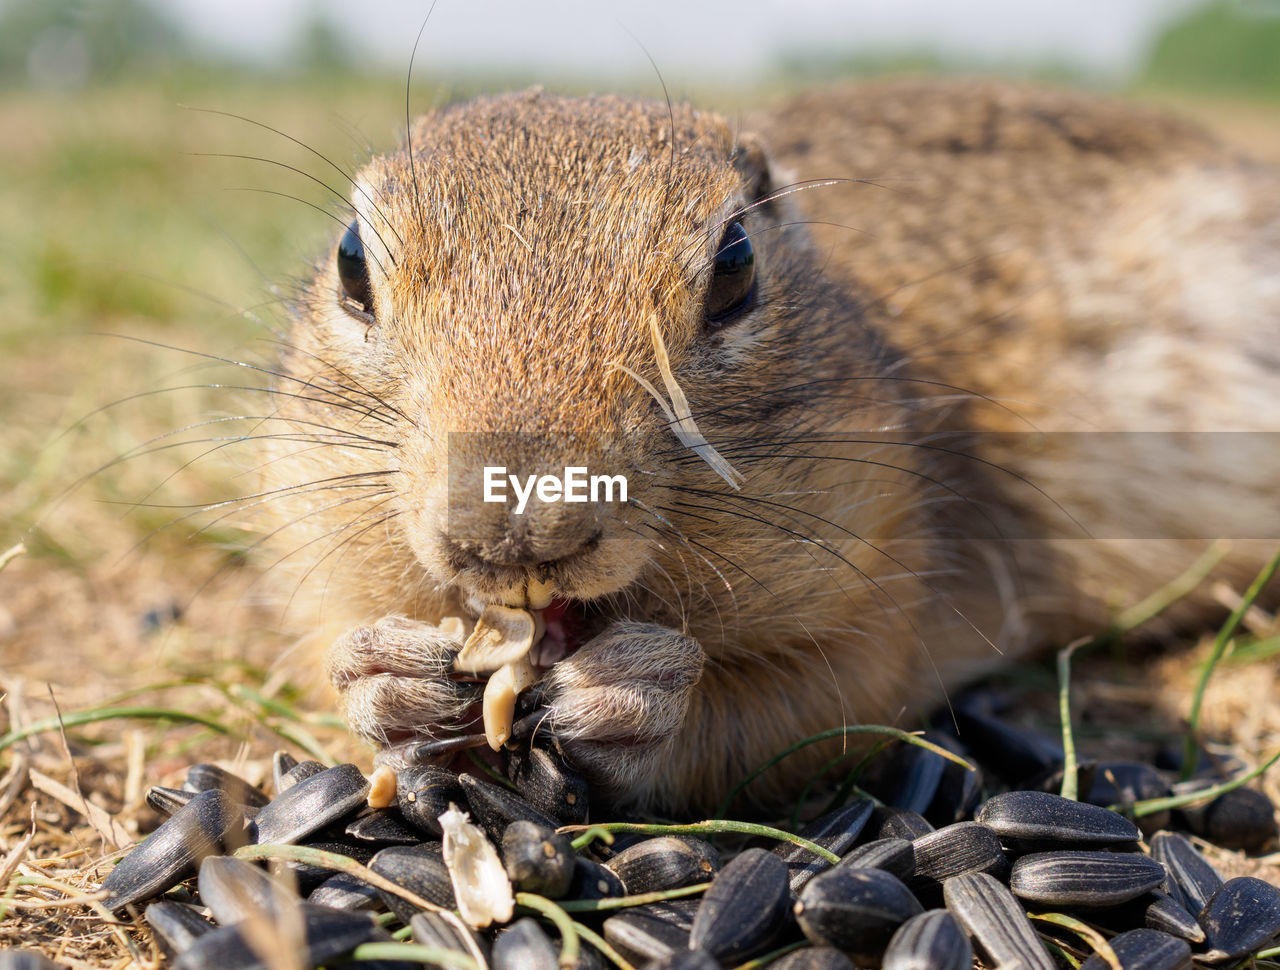 animal, animal themes, animal wildlife, mammal, one animal, wildlife, squirrel, rodent, whiskers, portrait, eating, nature, no people, food, cute, looking at camera, close-up, prairie dog, outdoors, grass, food and drink, animal body part, day, chipmunk